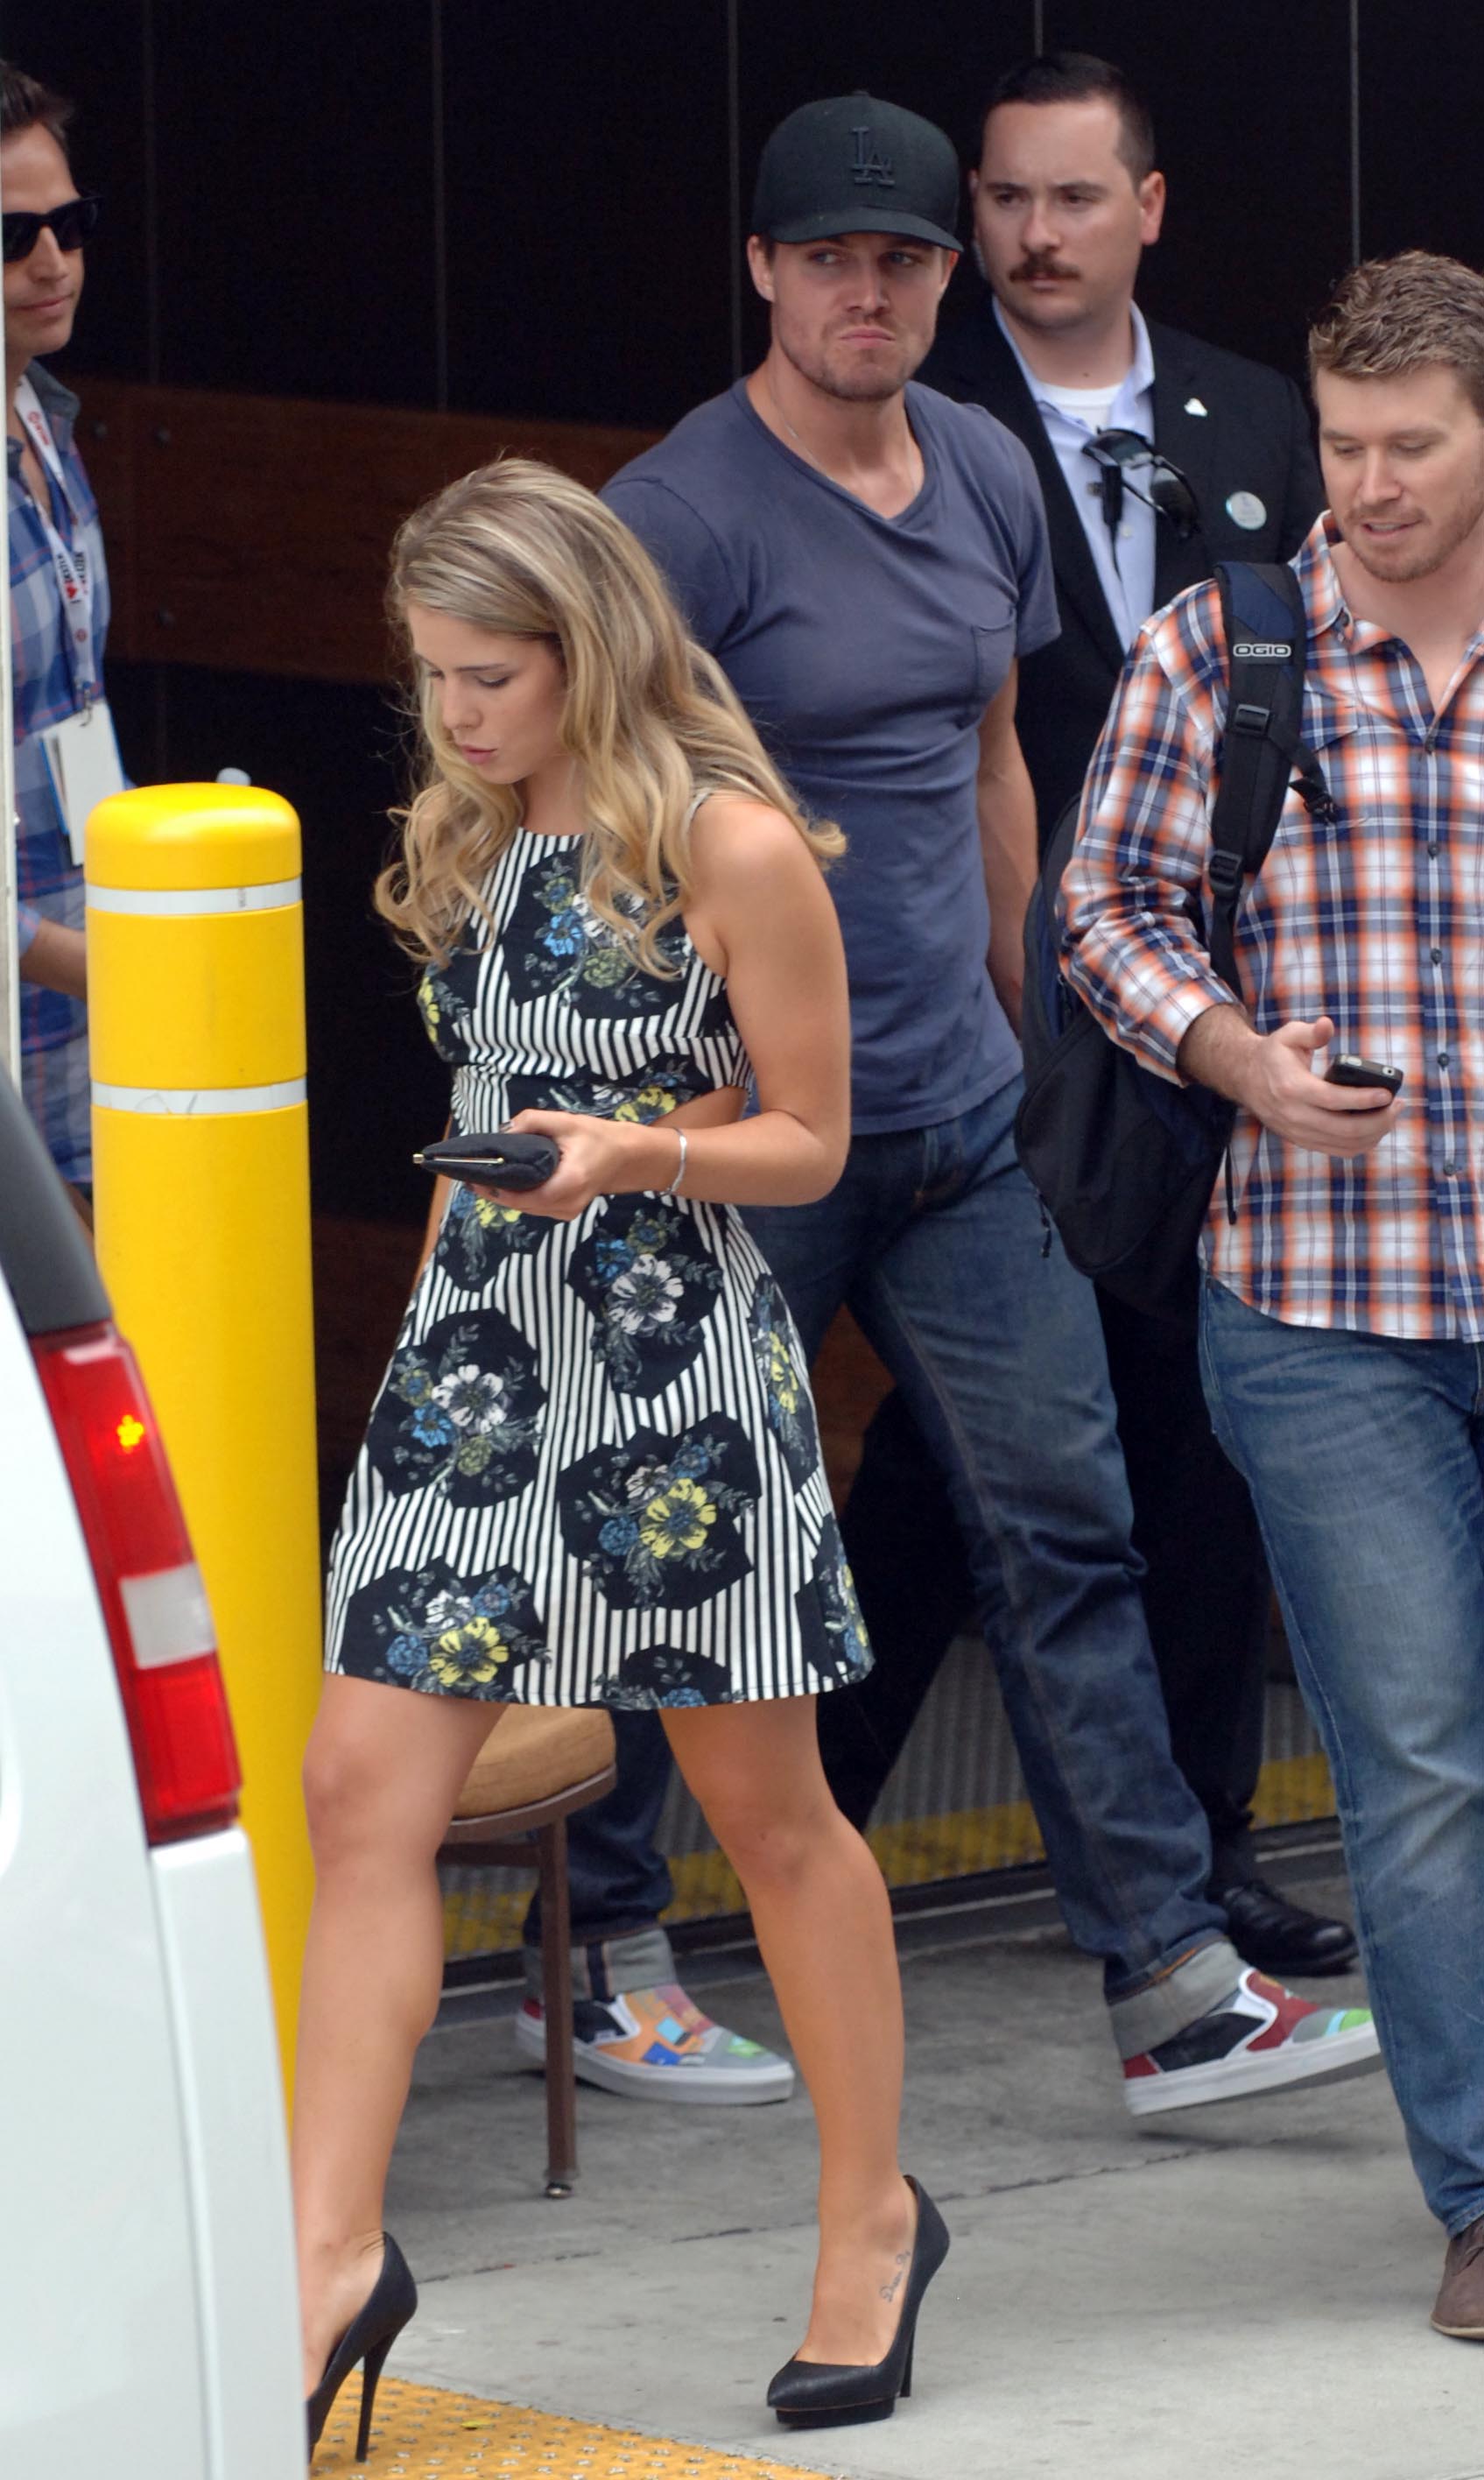 Stephen Amell and Emily Bett Rickards Arrive at the San Diego Comic-Con, July 20th 2013